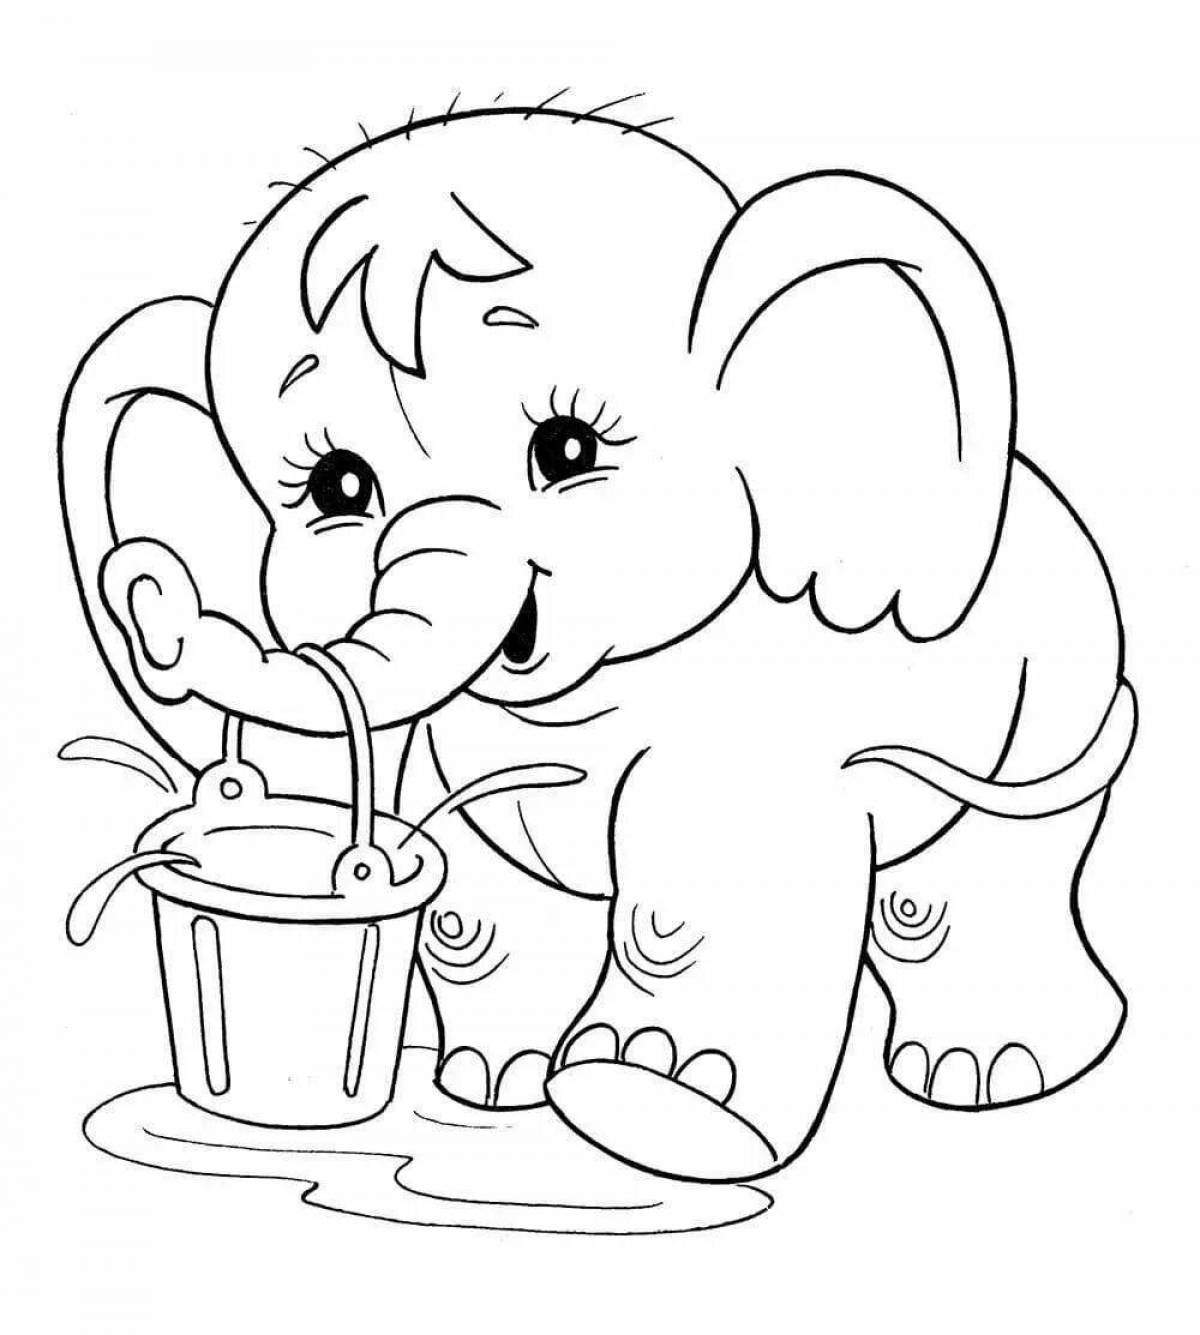 Cute elephant coloring for kids